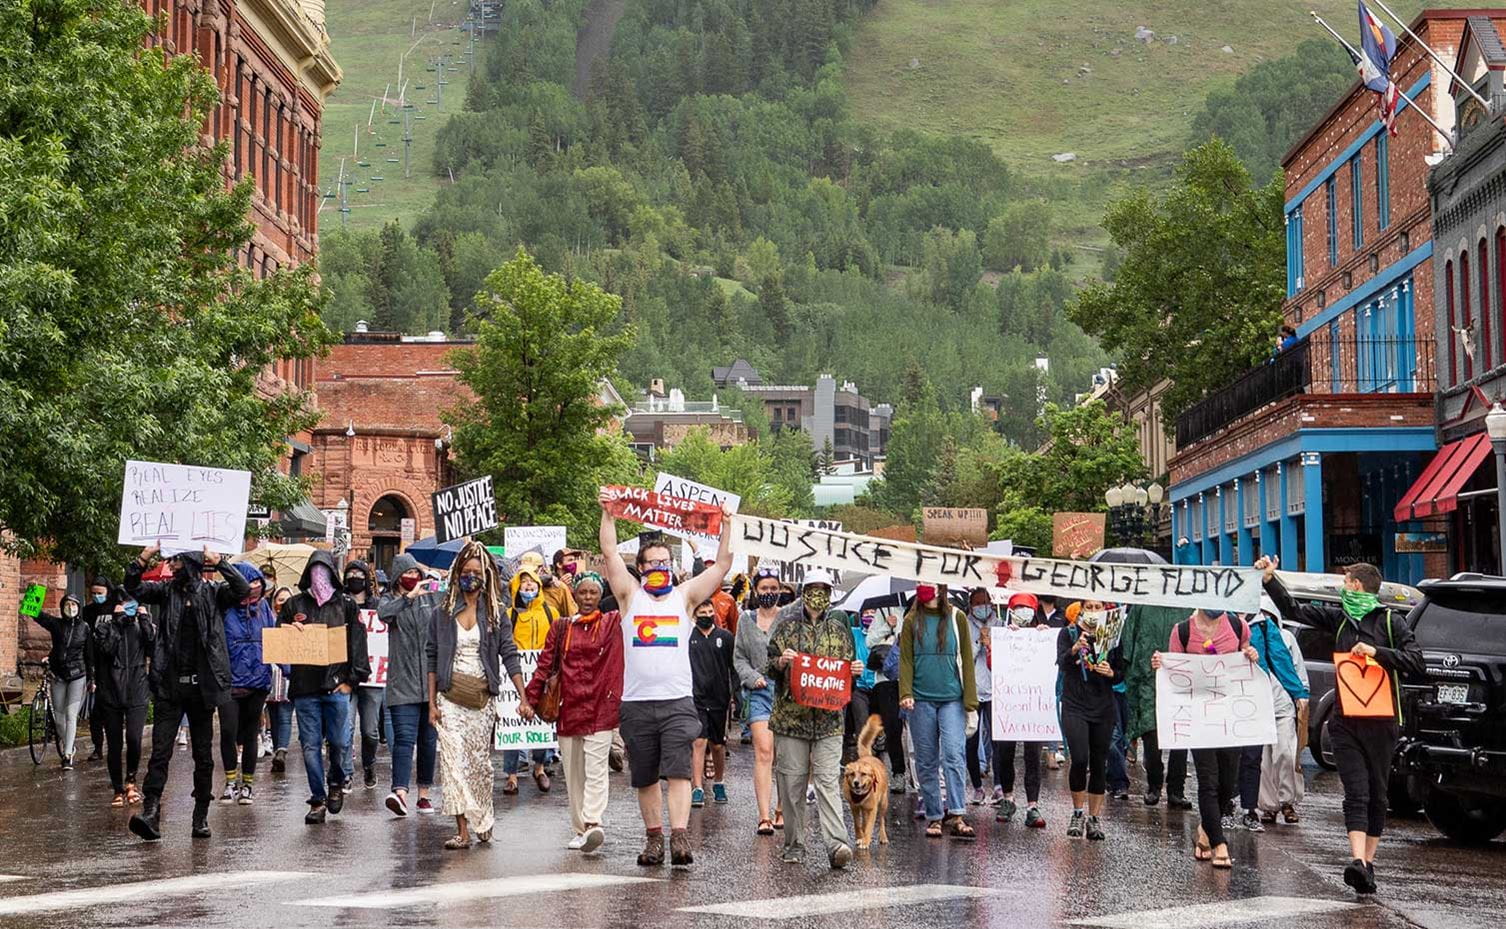 Racial Justice and BLM demonstration in downtown Aspen, Colorado.